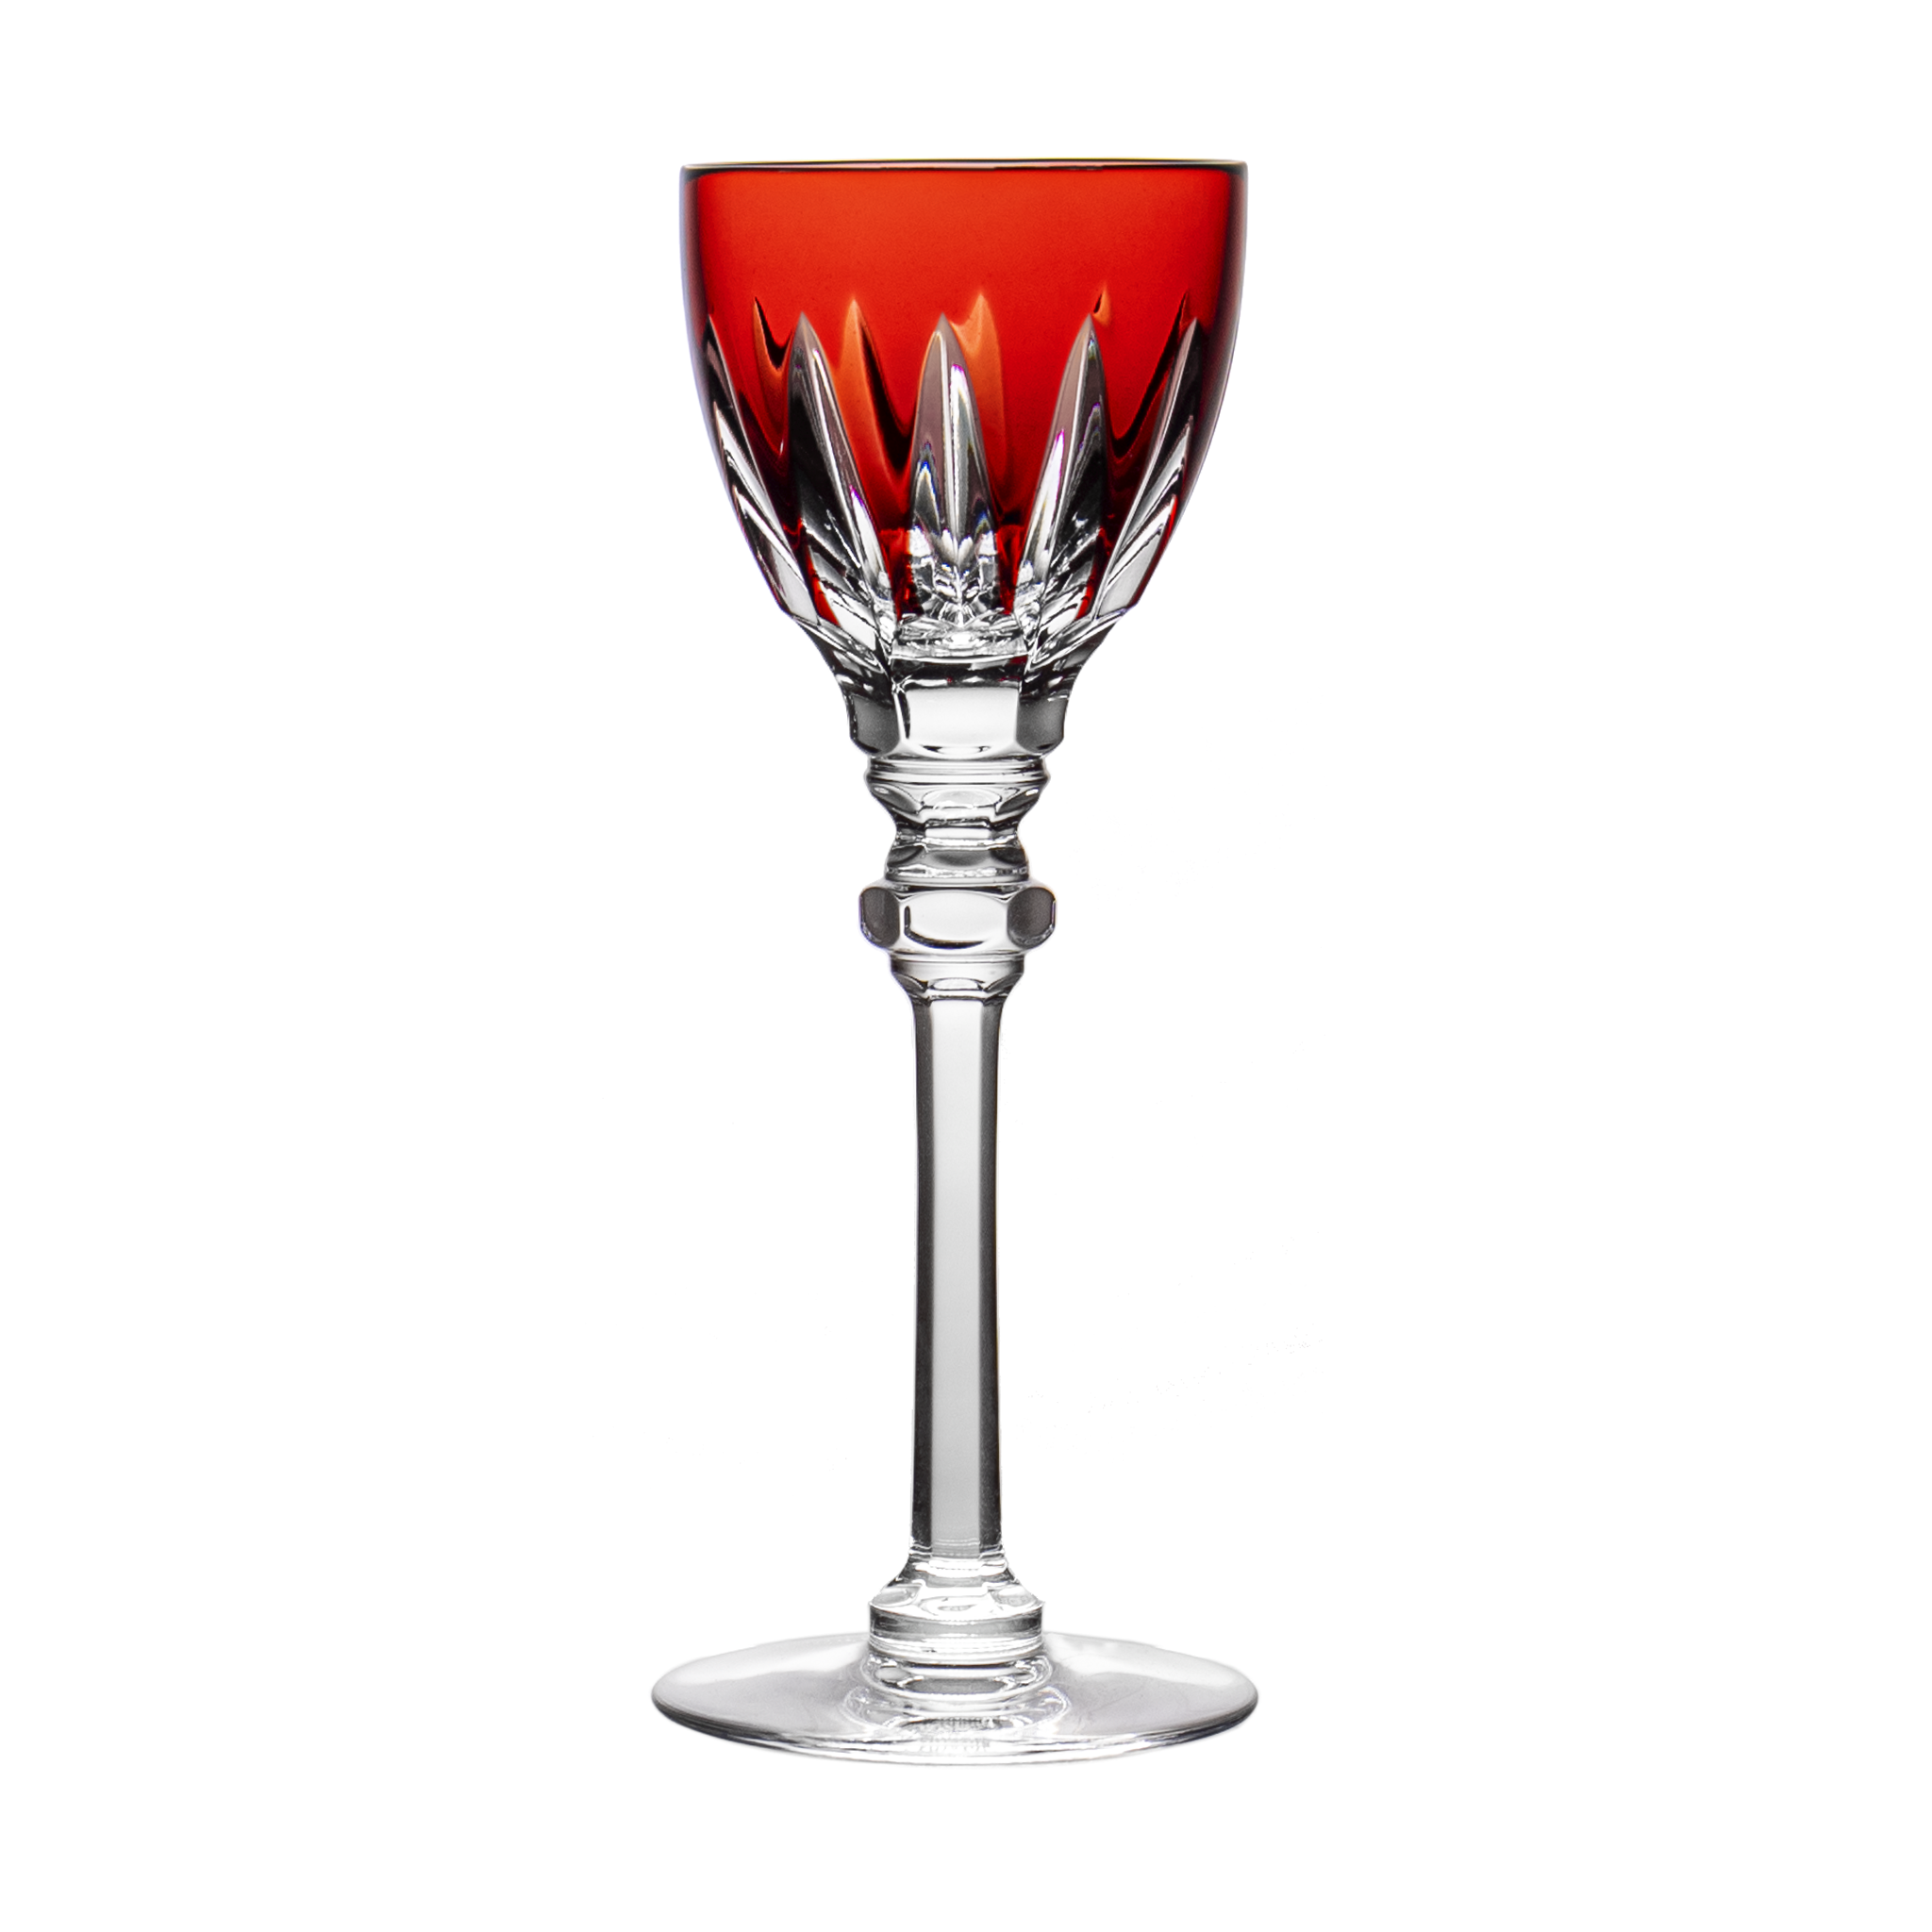 Fabergé Odessa Ruby Red Small Wine Glass 2nd Edition - Ajka Crystal